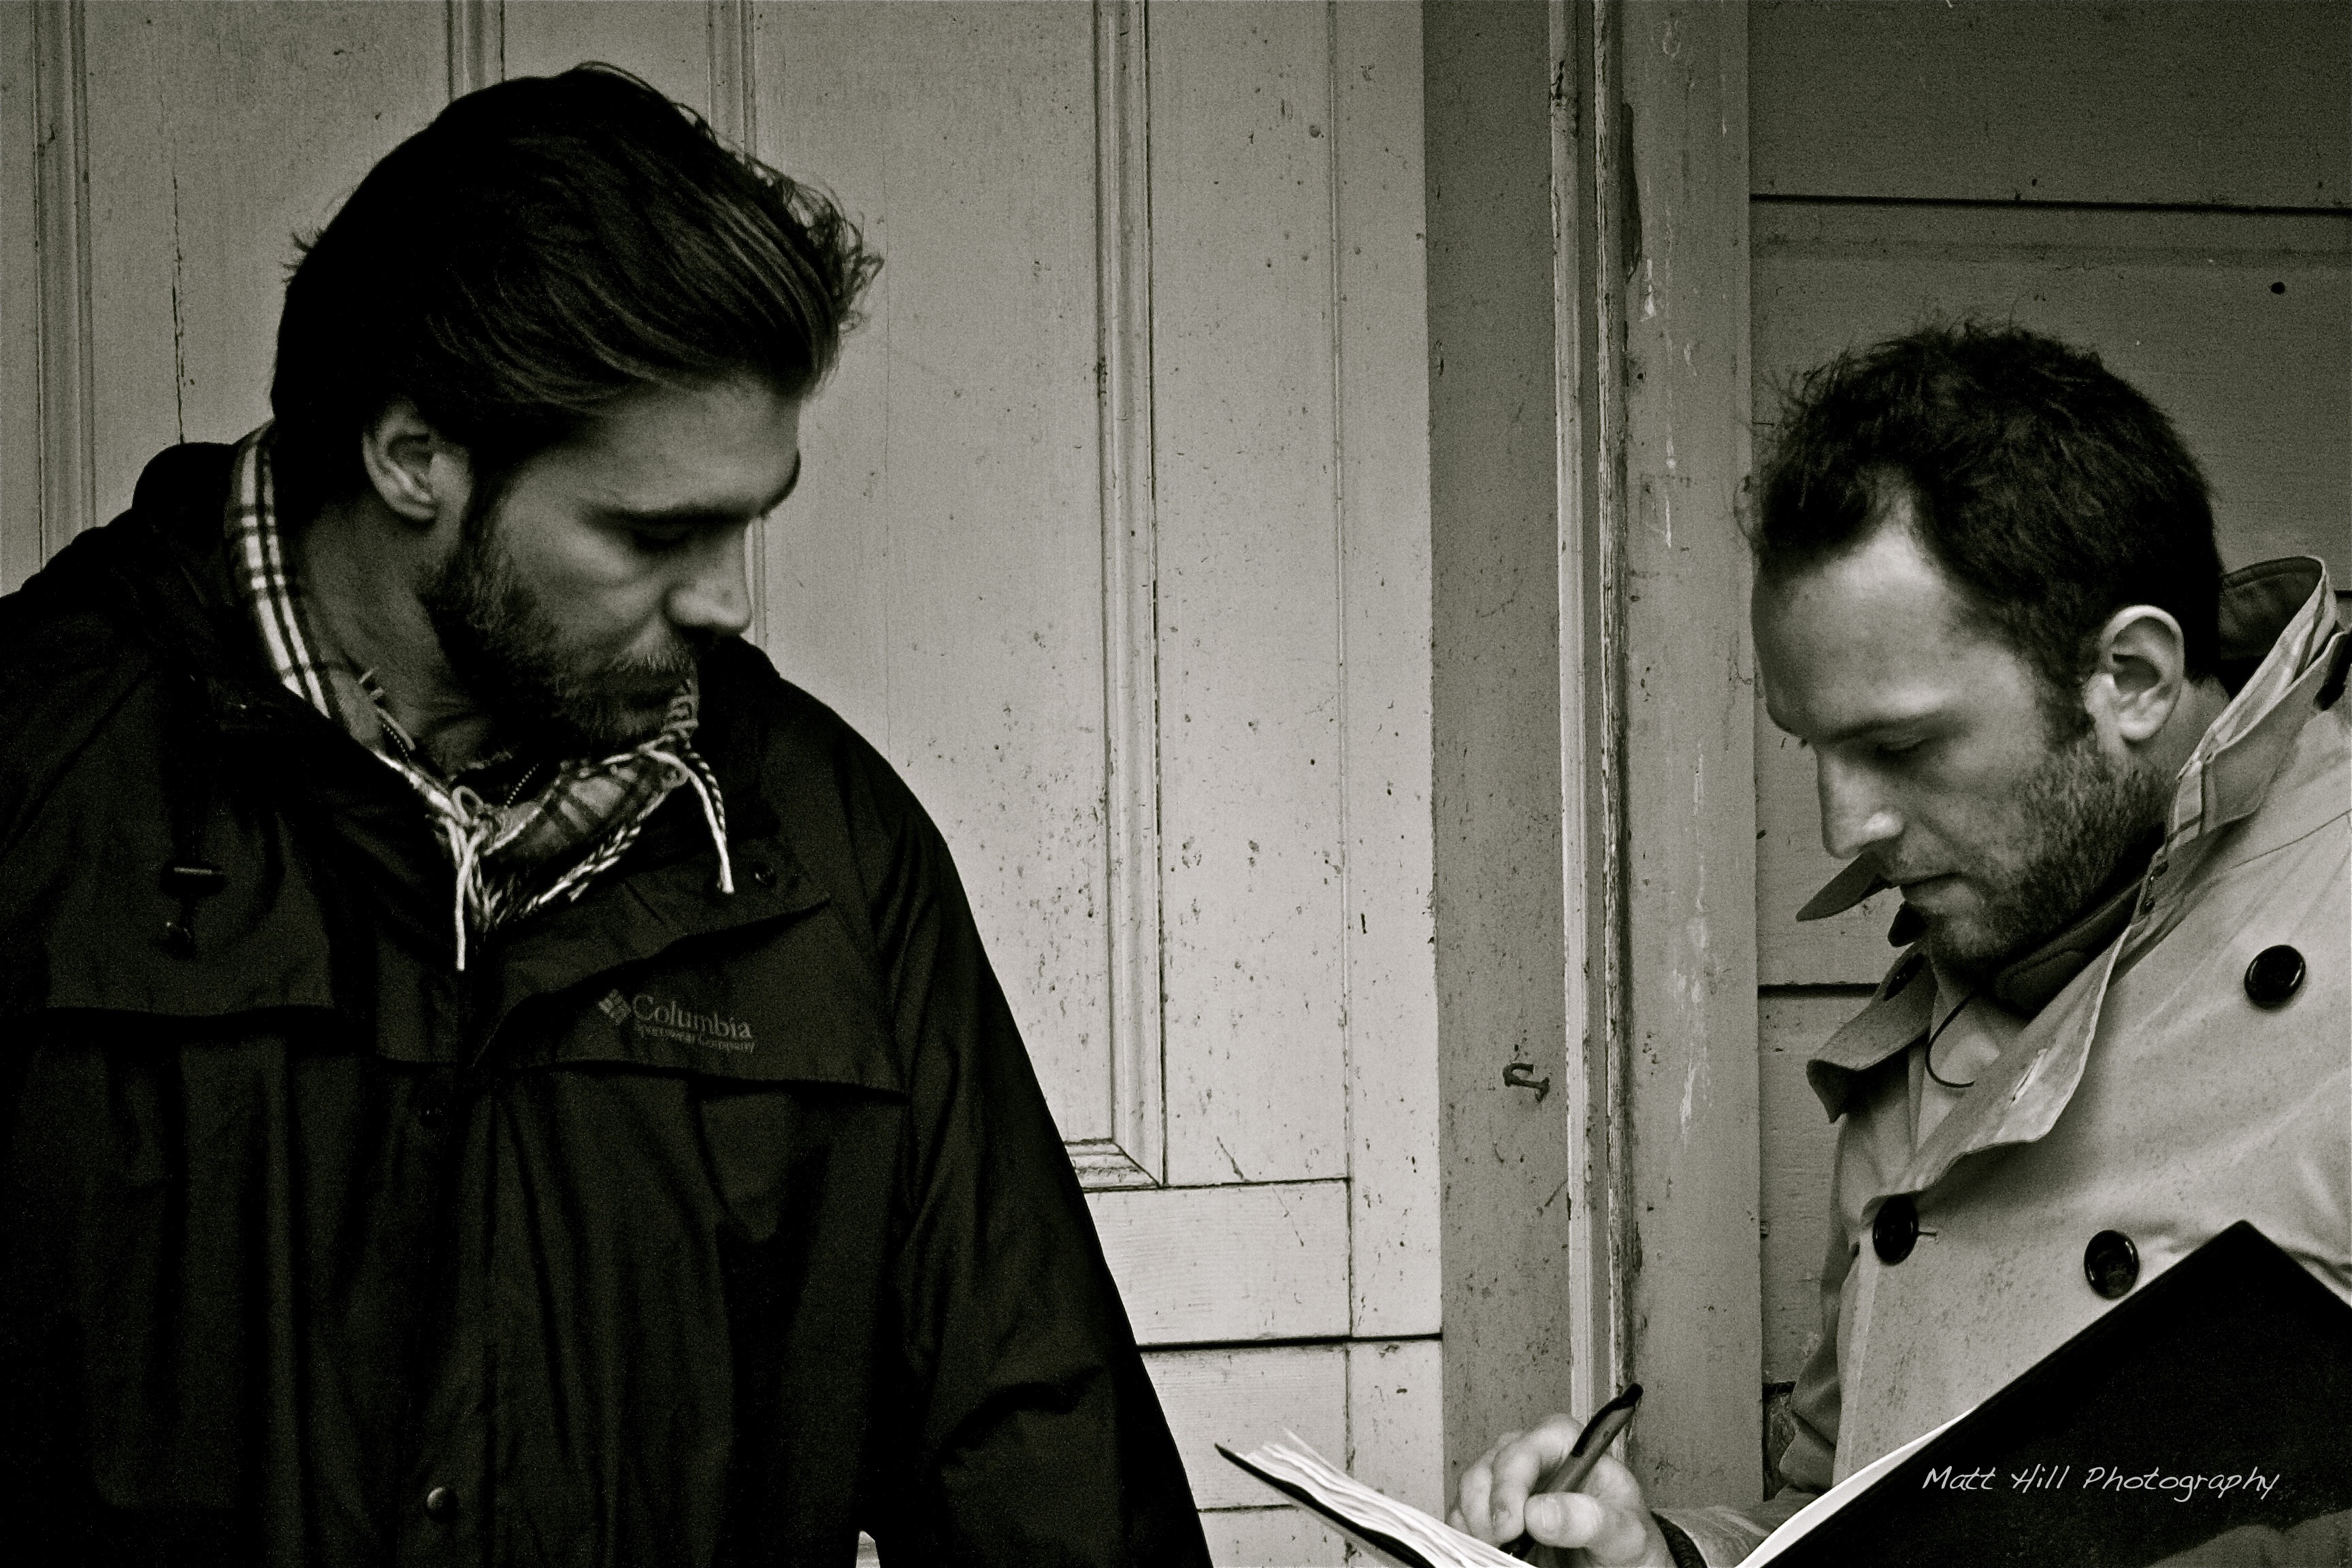 Still of Michael A. Newcomer and Pierre-Emmanuel Plassart in Harmony